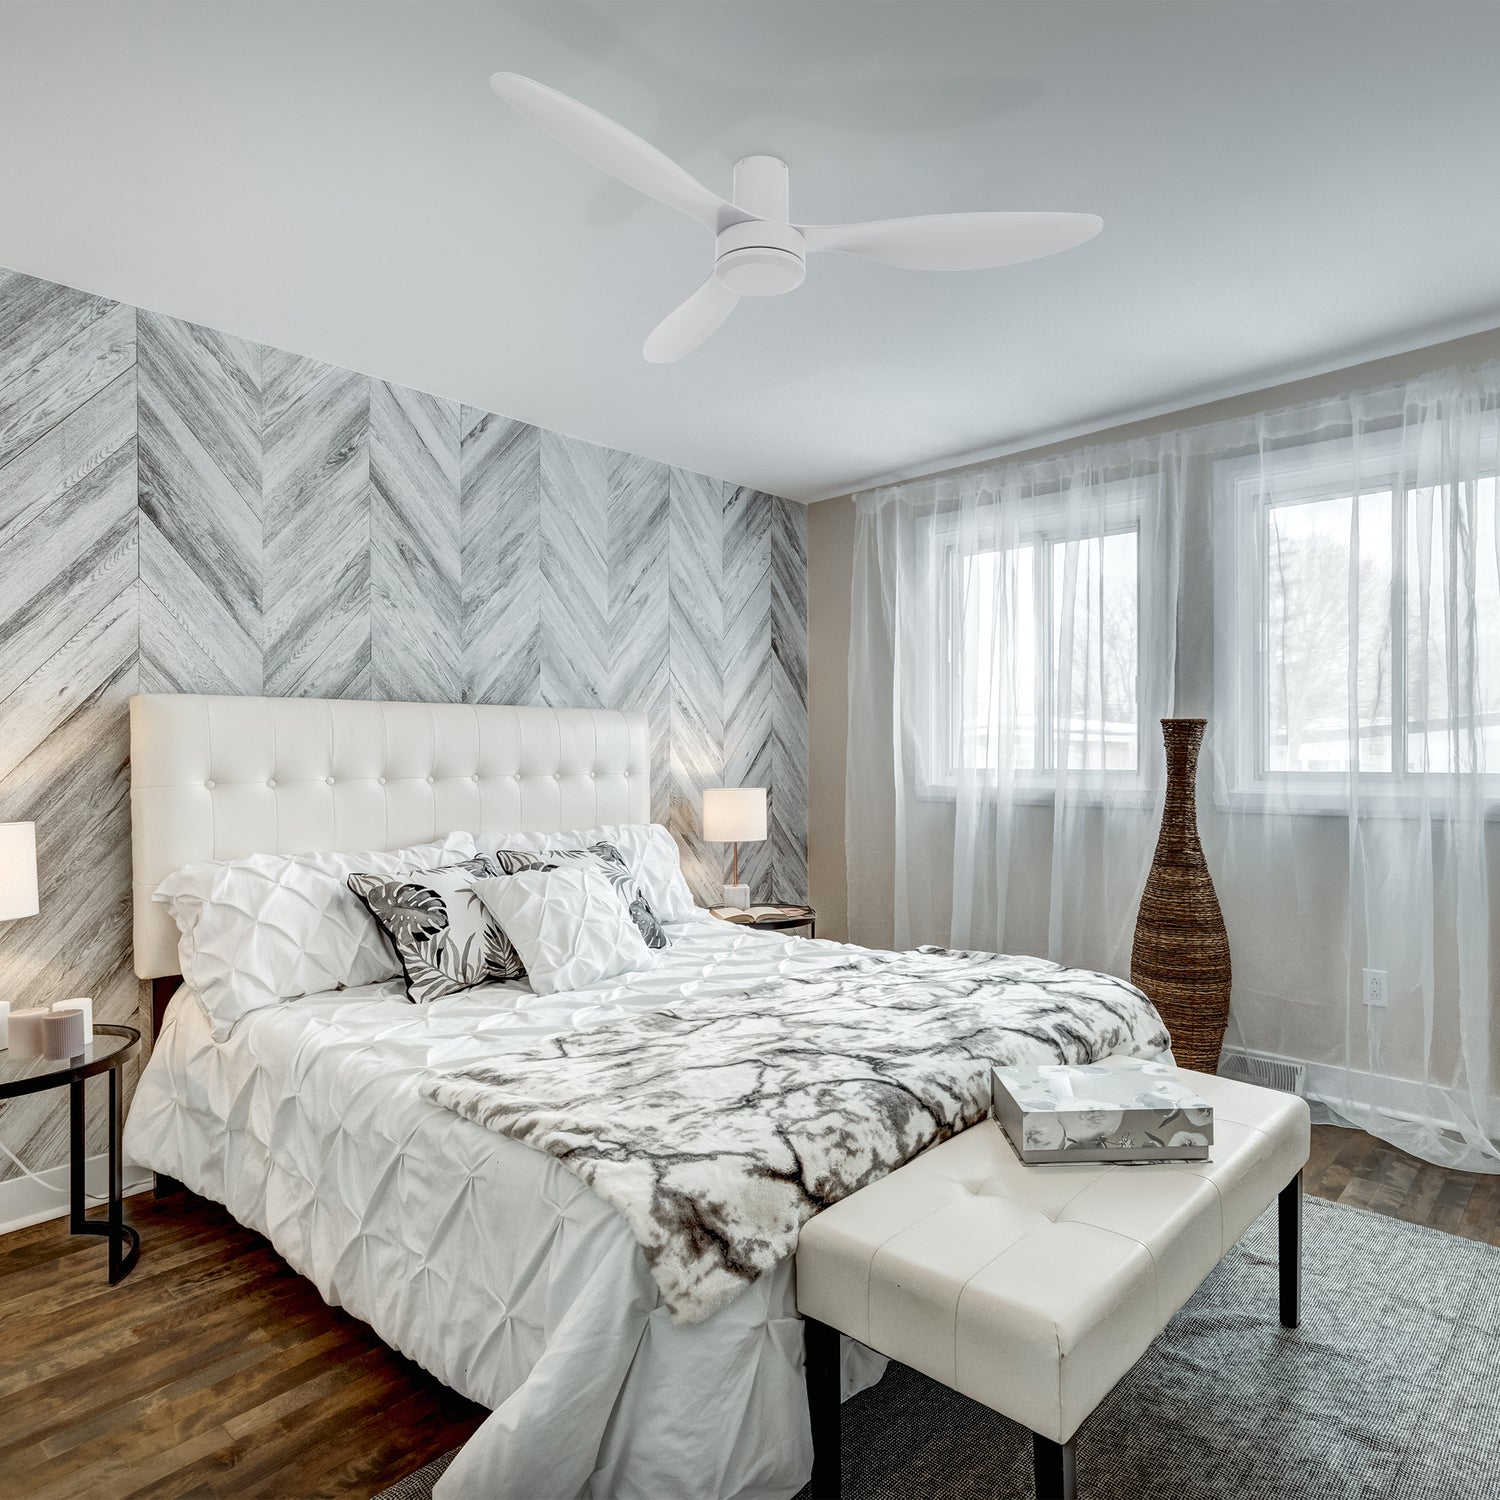 Whisper-quiet morning in your bedroom with the 52in Ceiling Fan. Remote-controlled, reversible, and durable ABS blades for personalized comfort. 